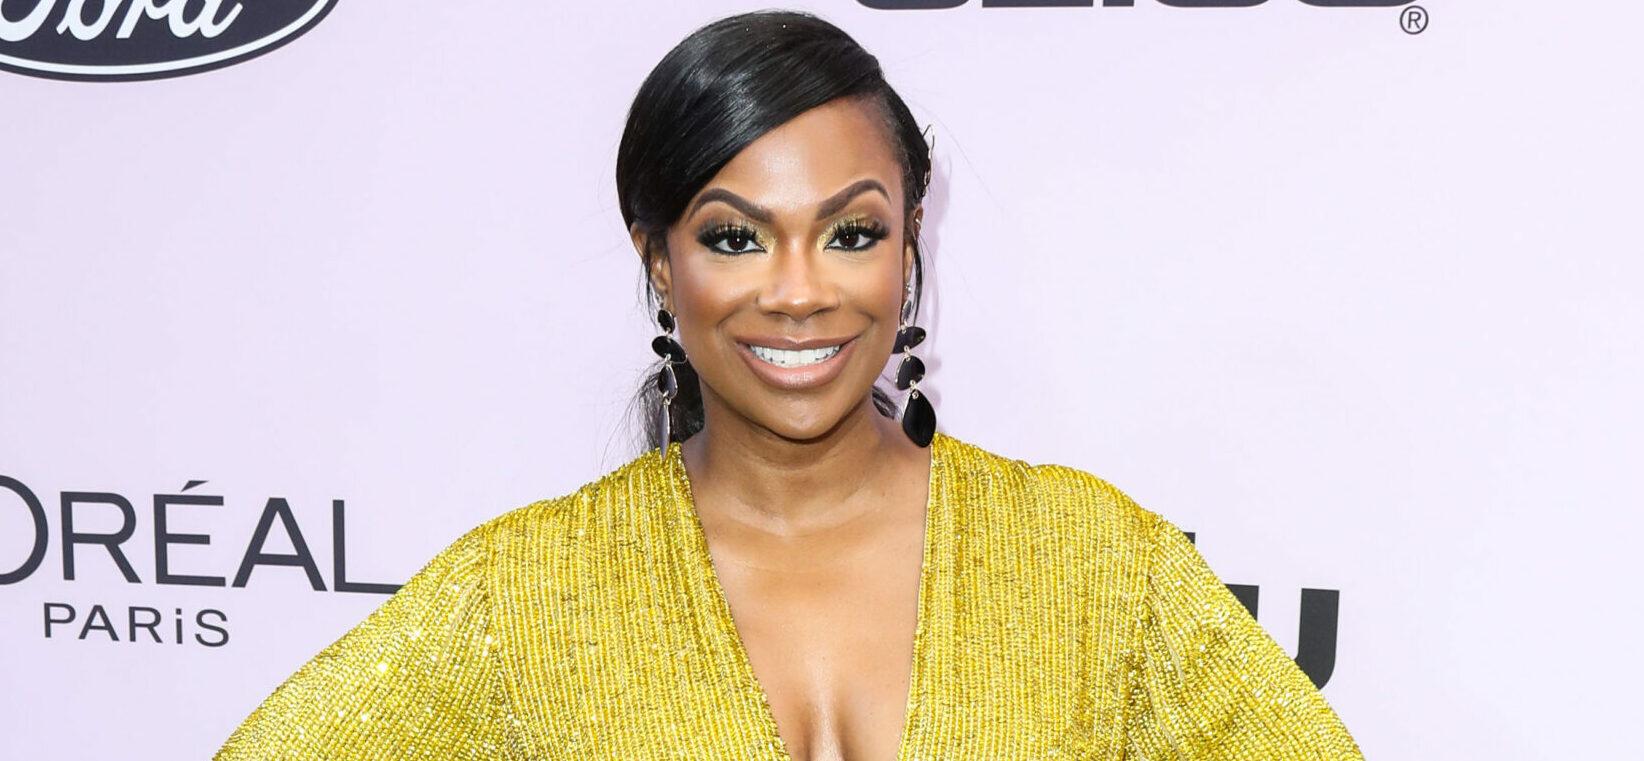 Kandi Burruss Reveals Reason For Exit From ‘RHOA’ After 14 Seasons